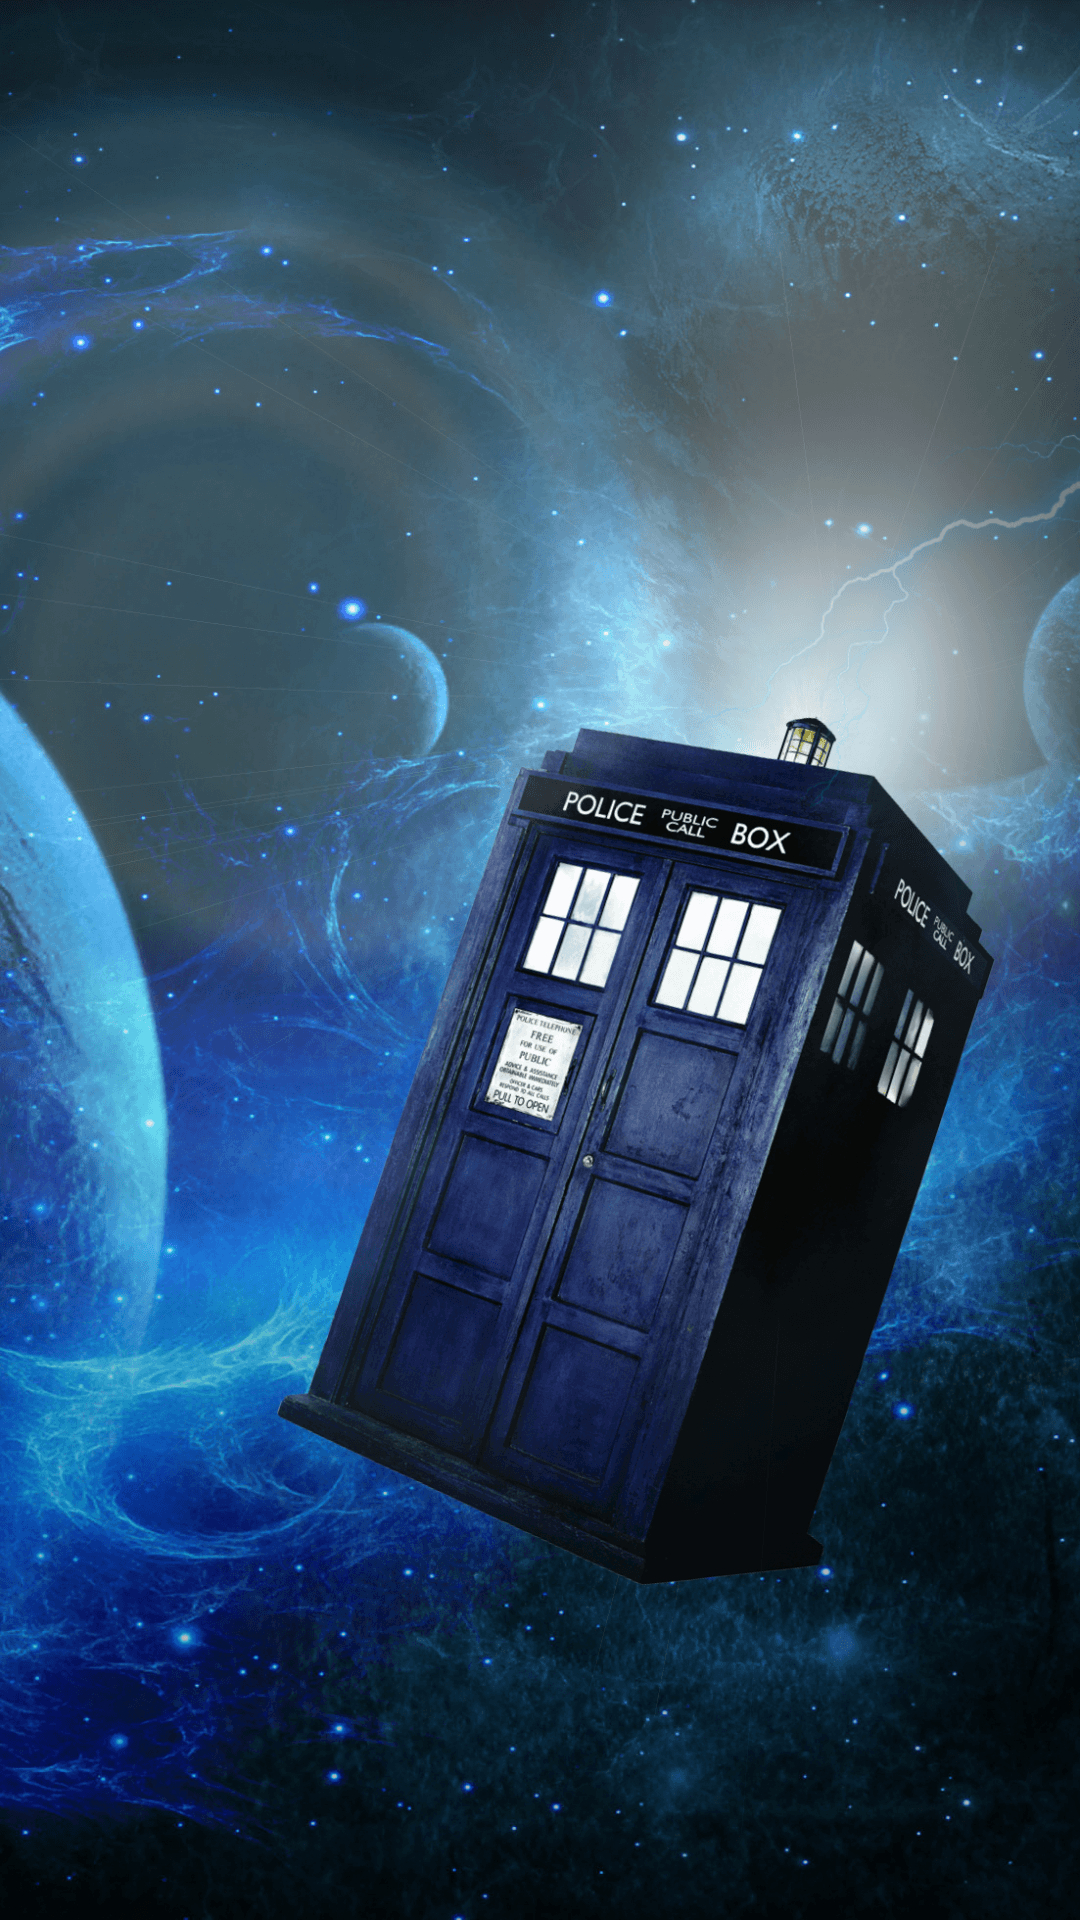 1080x1920 Dr Who iPhone Wallpapers Top Free Dr Who iPhone Backgrounds